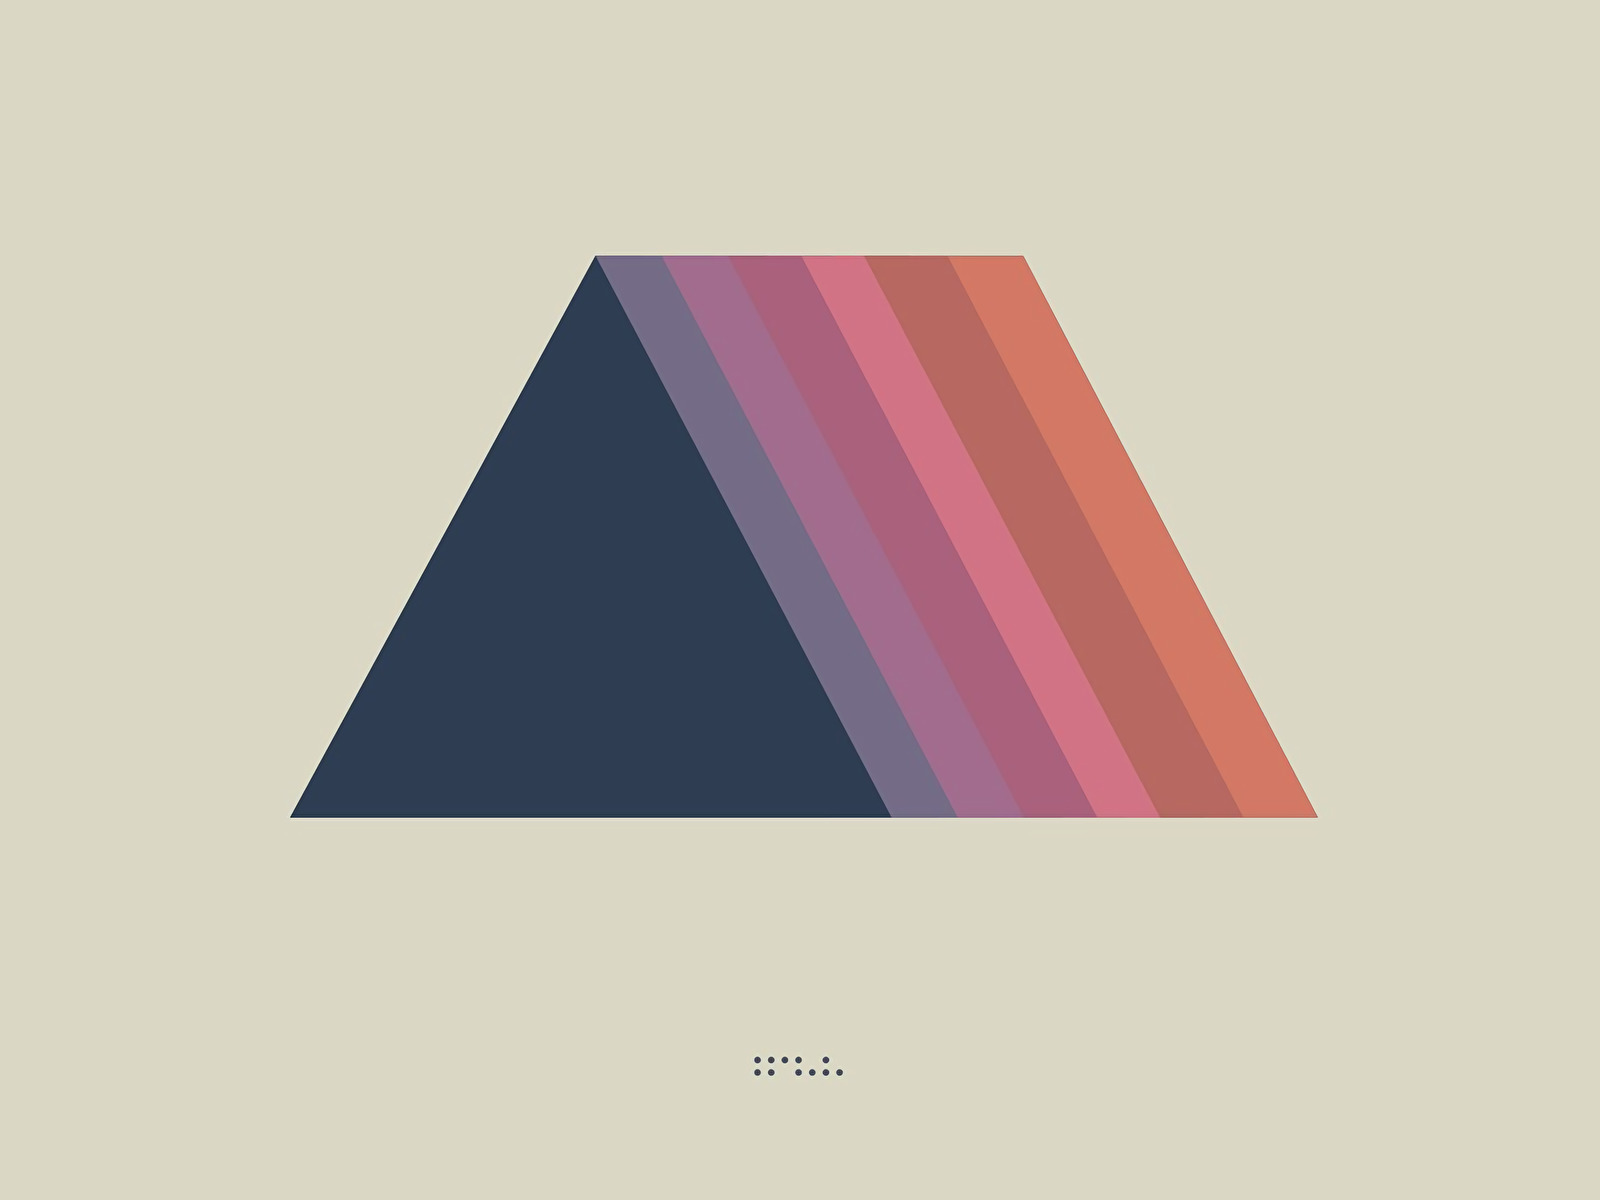 Tycho Wallpapers